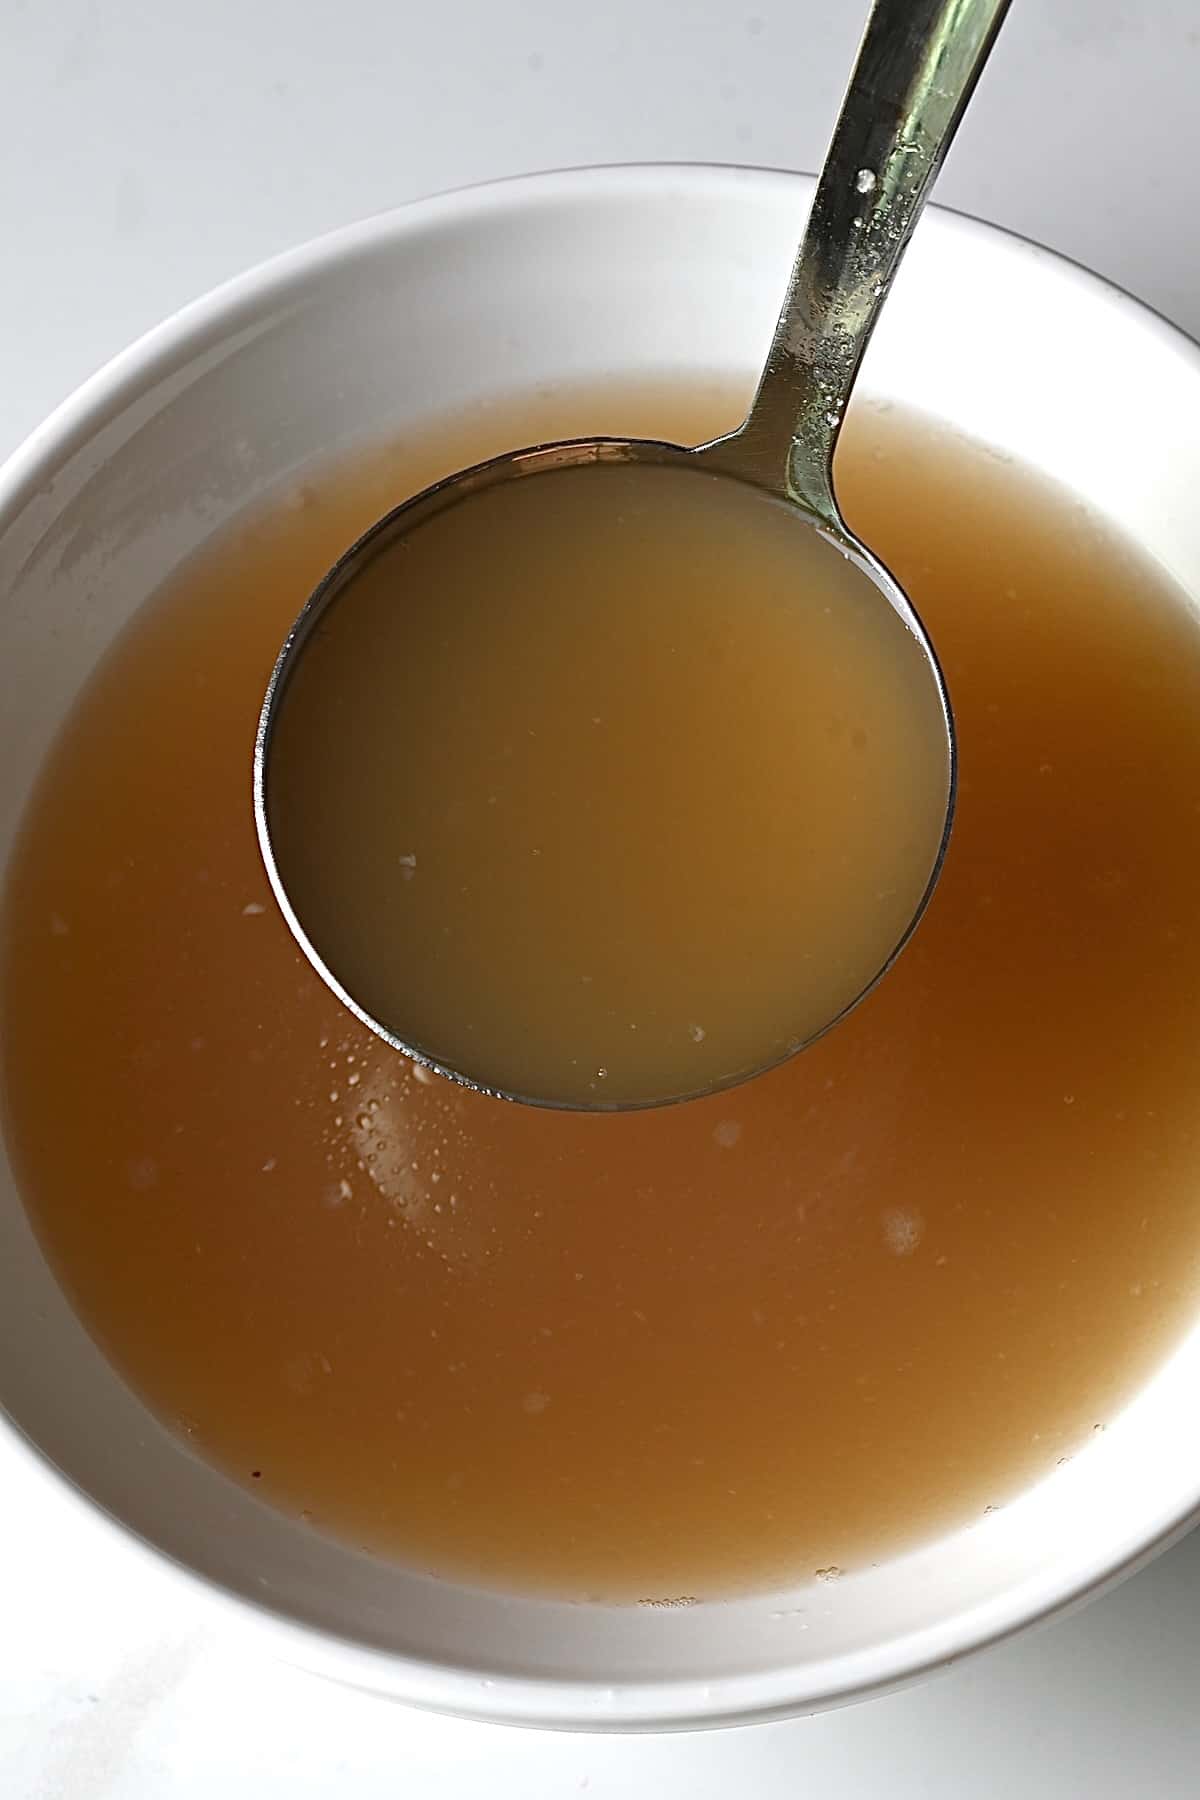 An Easy Trick for Making Homemade Broth